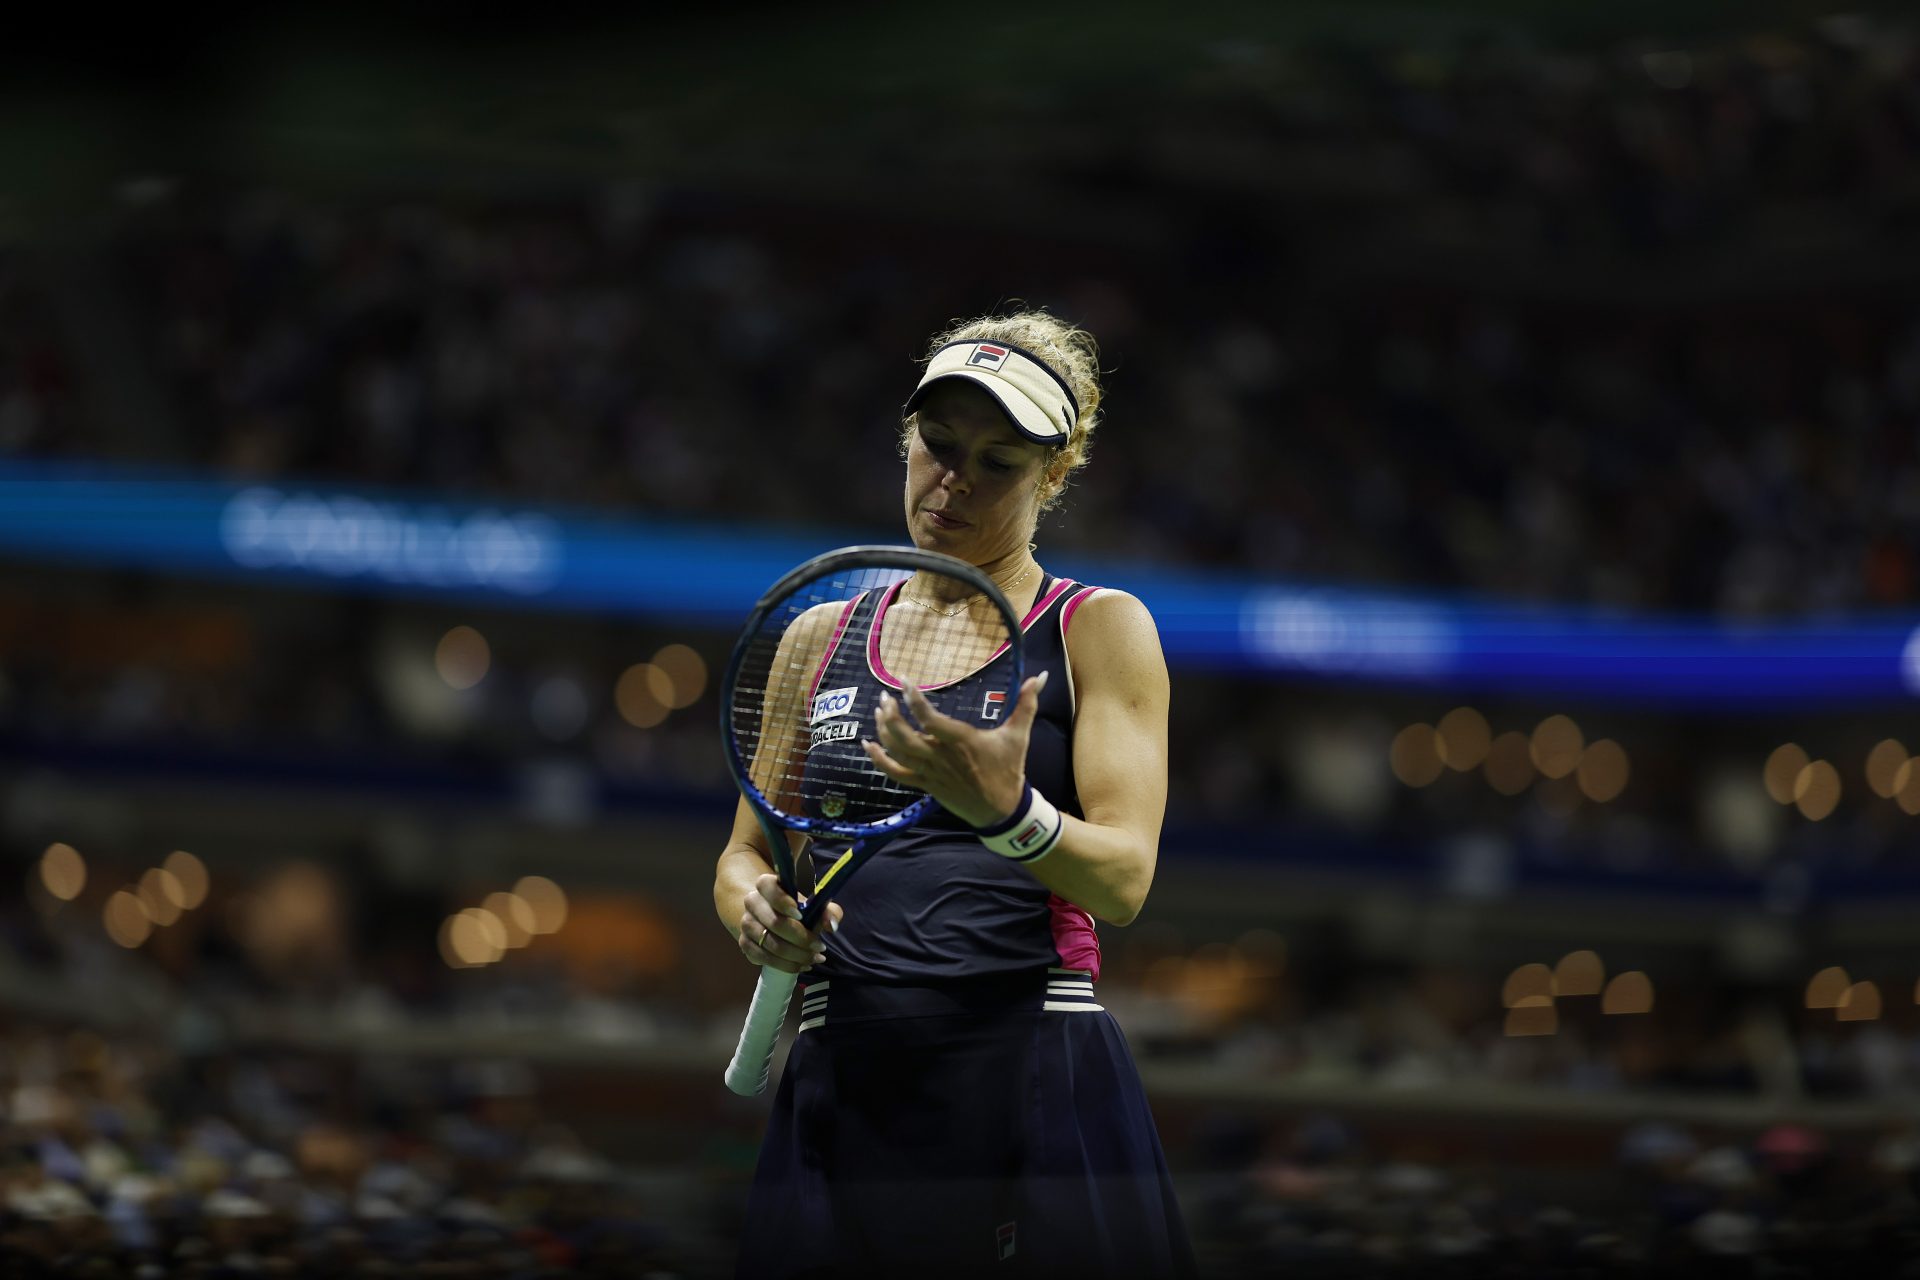 'They had no respect!' – Laura Siegemund breaks down in tears at the US Open